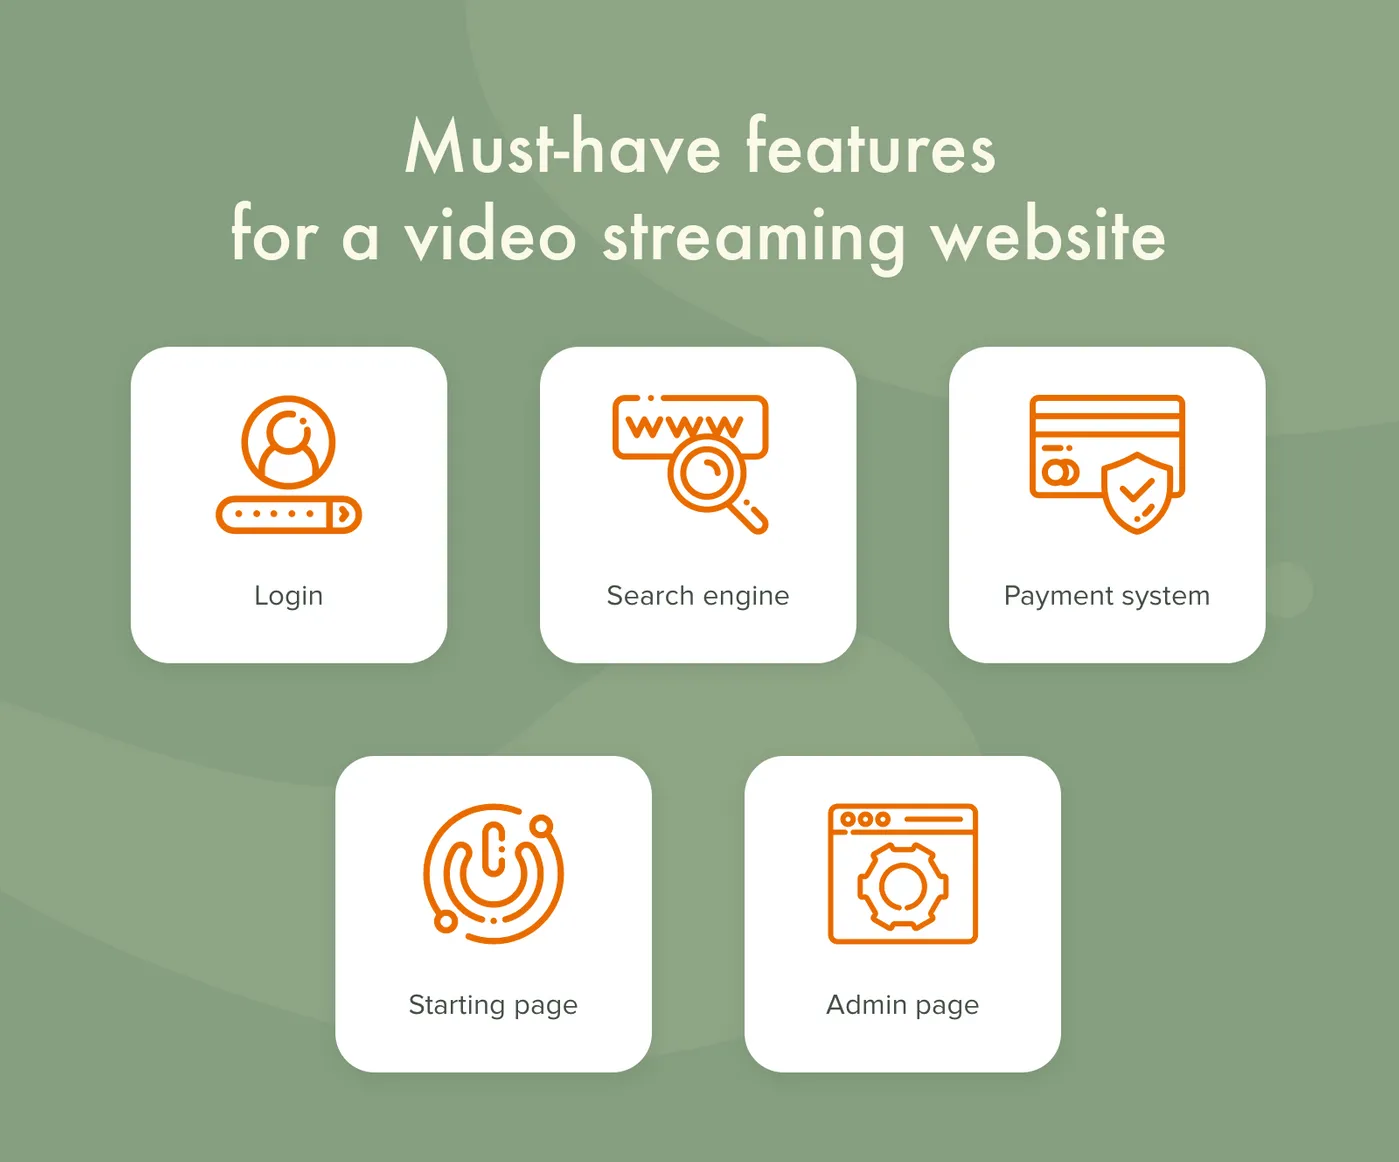 How to build a video streaming website MVP features